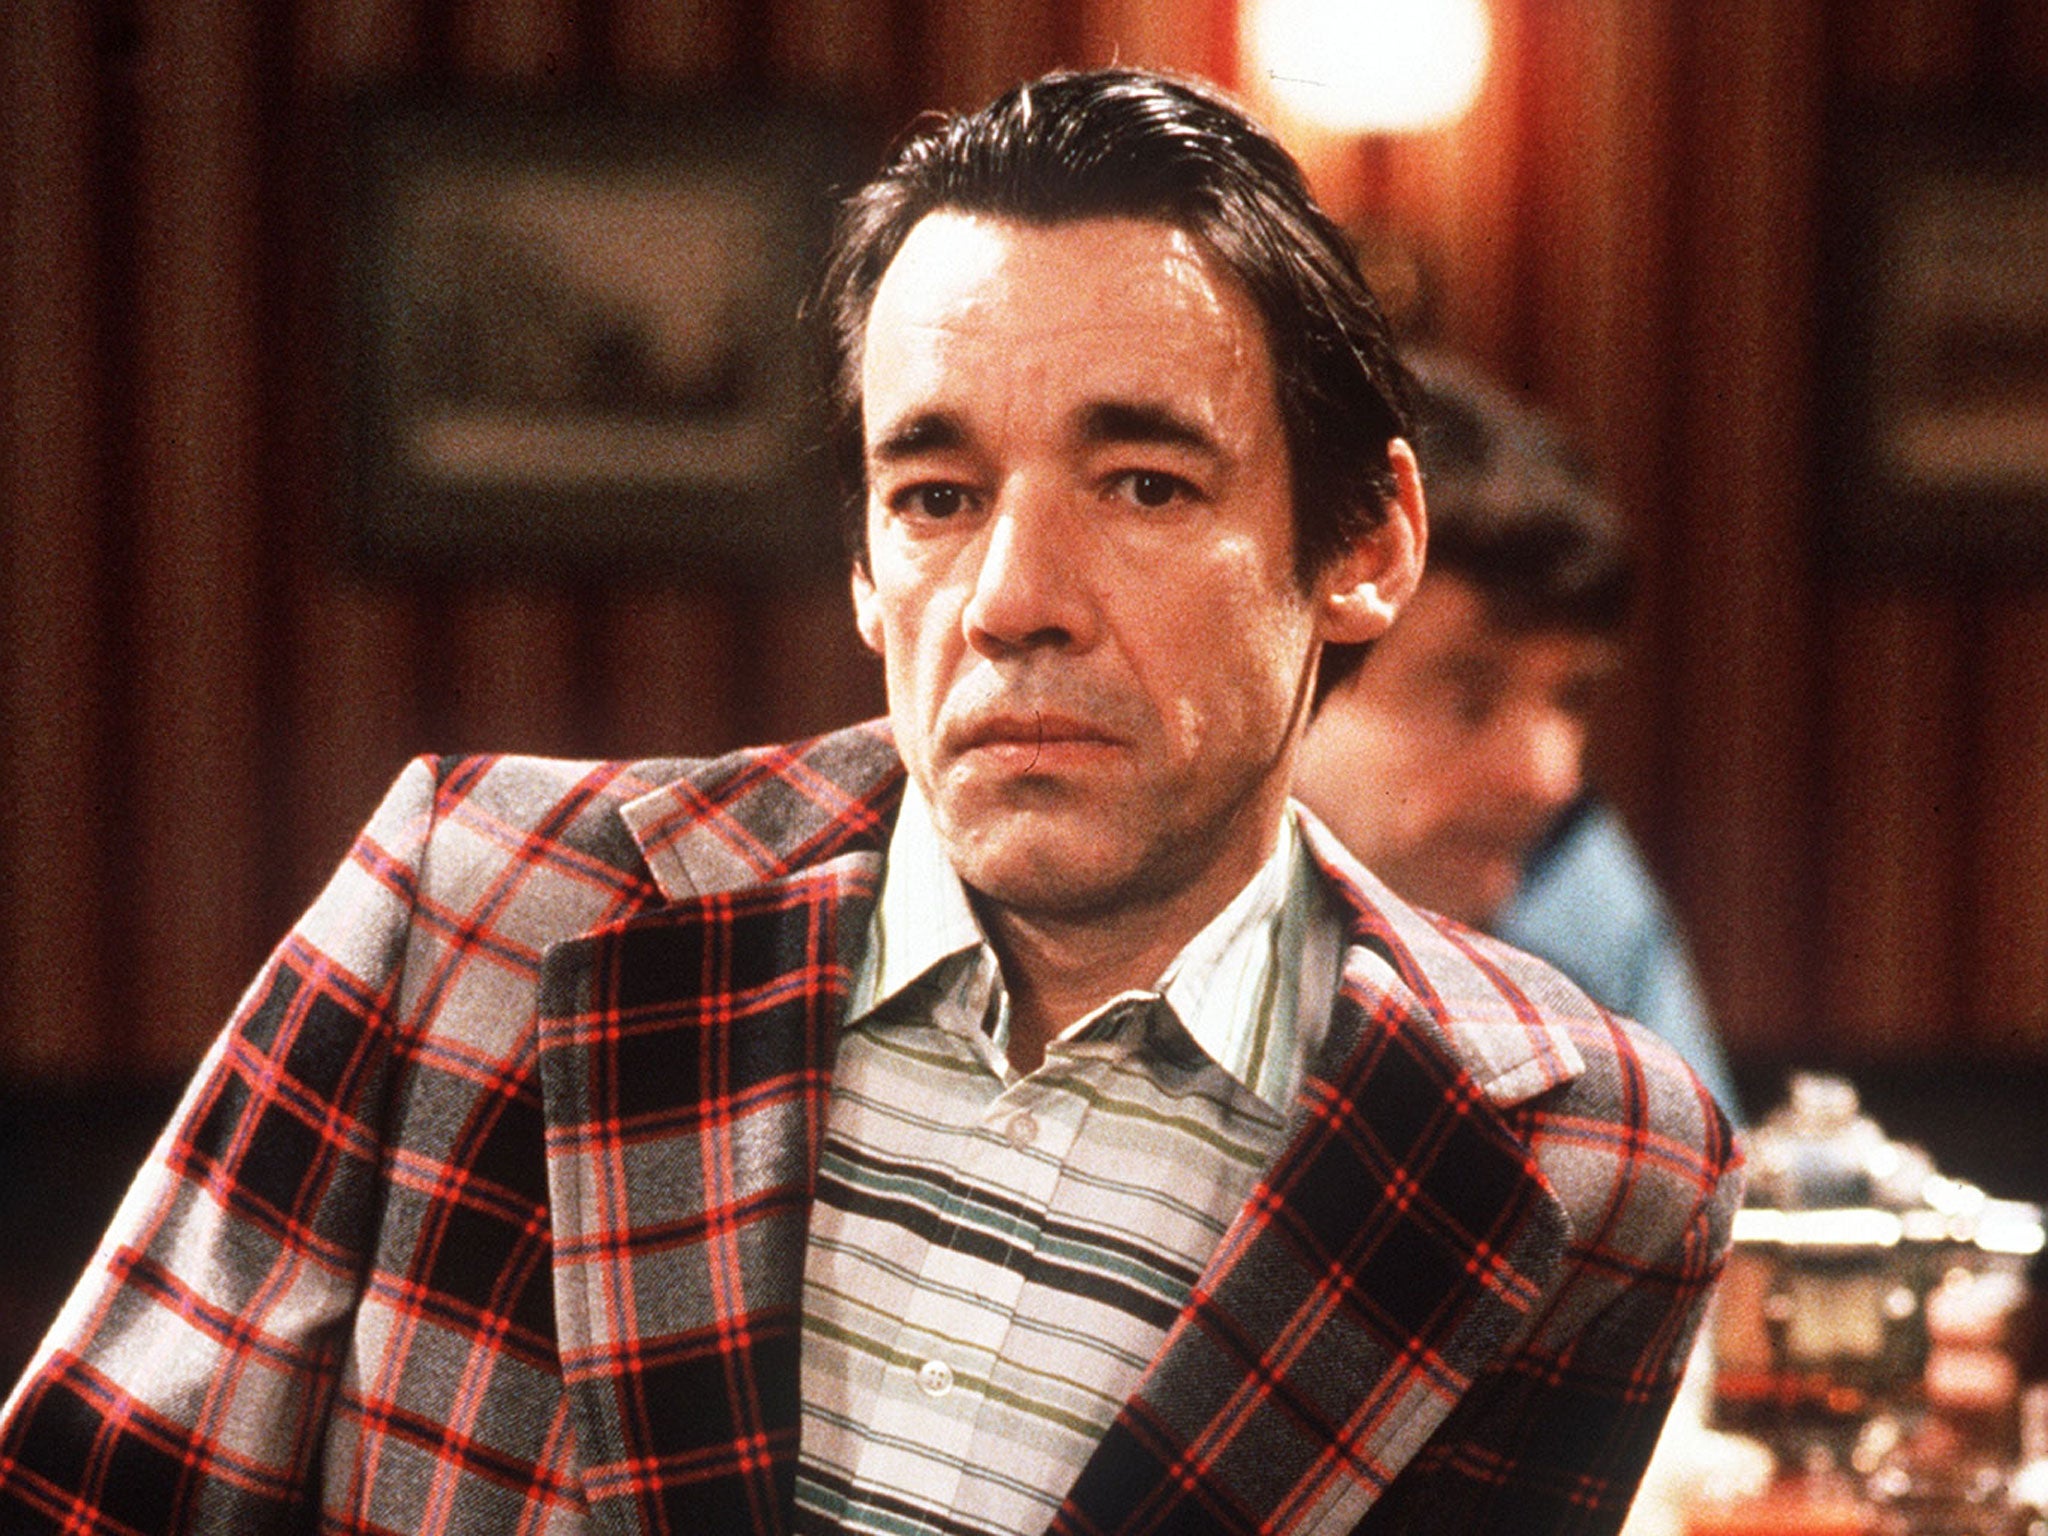 Lloyd-Pack as Trigger in 'Only Fools and Horses'; he described the role as 'a blessing and a curse'